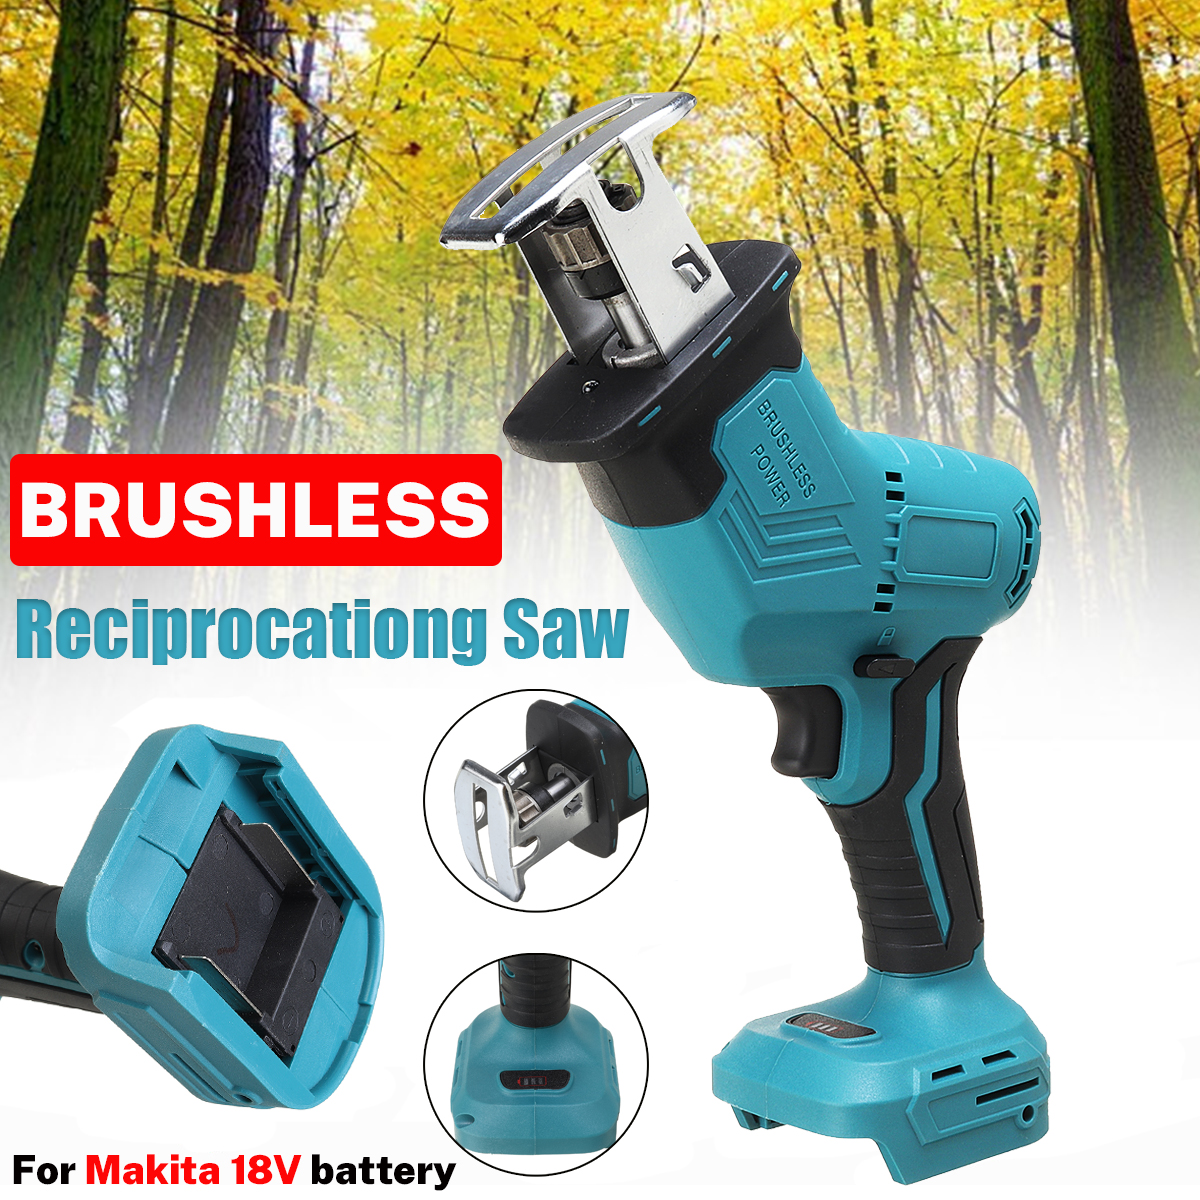 Rechargeable-Reciprocating-Saw-Brushless-Electric-Saw-For-Makita-Battery-Woodworking-Wood-Plastic-Ir-1886209-2